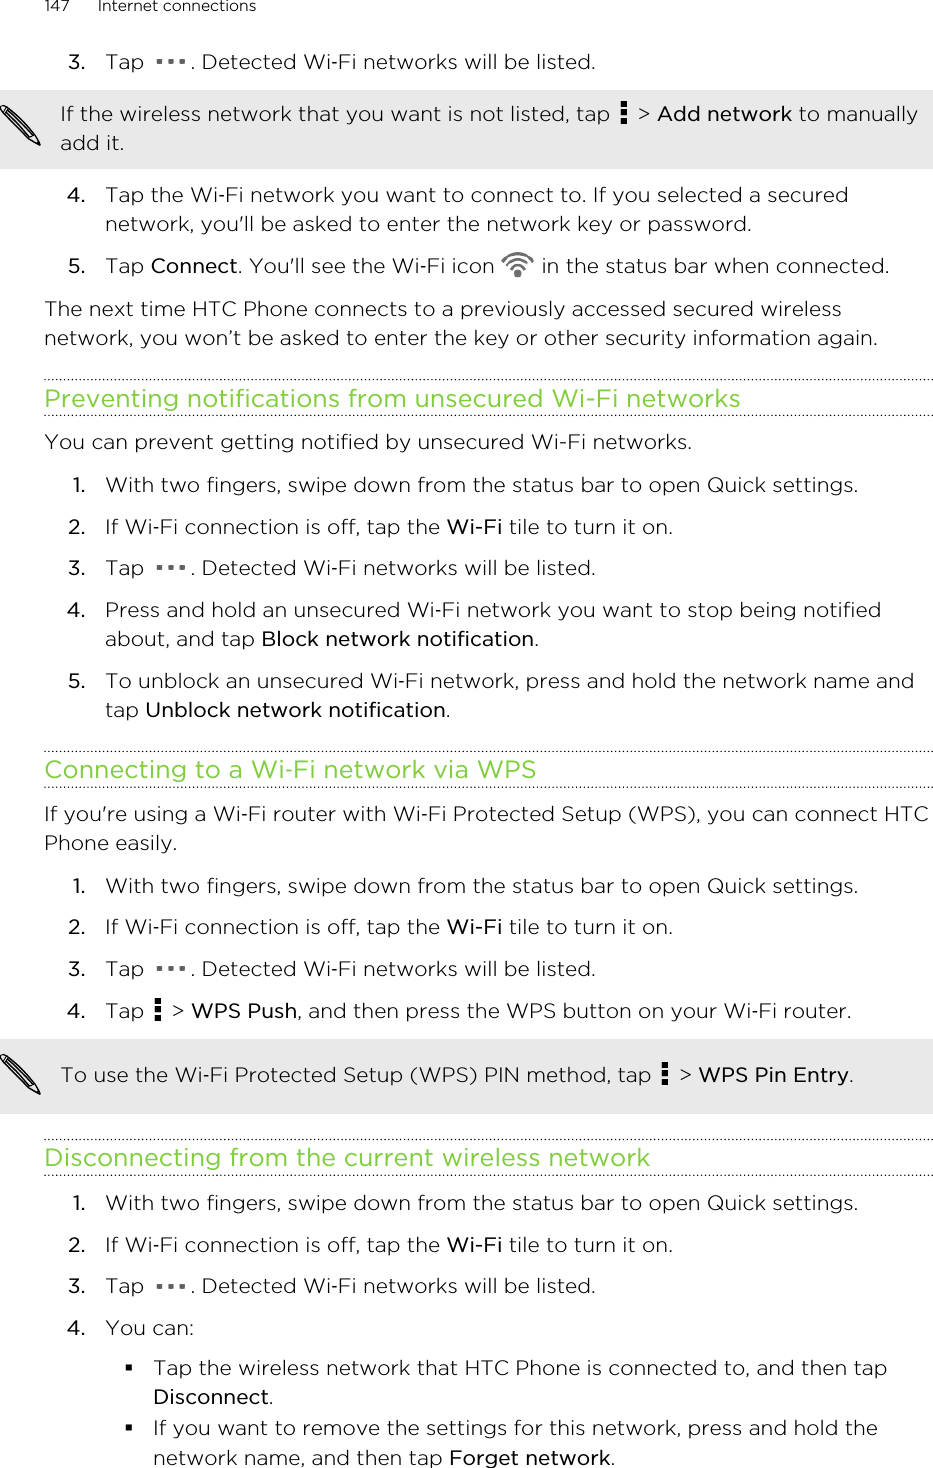 3. Tap  . Detected Wi‑Fi networks will be listed.If the wireless network that you want is not listed, tap   &gt; Add network to manuallyadd it.4. Tap the Wi‑Fi network you want to connect to. If you selected a securednetwork, you&apos;ll be asked to enter the network key or password.5. Tap Connect. You&apos;ll see the Wi‑Fi icon   in the status bar when connected.The next time HTC Phone connects to a previously accessed secured wirelessnetwork, you won’t be asked to enter the key or other security information again.Preventing notifications from unsecured Wi-Fi networksYou can prevent getting notified by unsecured Wi-Fi networks.1. With two fingers, swipe down from the status bar to open Quick settings.2. If Wi‑Fi connection is off, tap the Wi-Fi tile to turn it on.3. Tap  . Detected Wi‑Fi networks will be listed.4. Press and hold an unsecured Wi‑Fi network you want to stop being notifiedabout, and tap Block network notification.5. To unblock an unsecured Wi‑Fi network, press and hold the network name andtap Unblock network notification.Connecting to a Wi‑Fi network via WPSIf you&apos;re using a Wi‑Fi router with Wi‑Fi Protected Setup (WPS), you can connect HTCPhone easily.1. With two fingers, swipe down from the status bar to open Quick settings.2. If Wi‑Fi connection is off, tap the Wi-Fi tile to turn it on.3. Tap  . Detected Wi‑Fi networks will be listed.4. Tap   &gt; WPS Push, and then press the WPS button on your Wi‑Fi router. To use the Wi‑Fi Protected Setup (WPS) PIN method, tap   &gt; WPS Pin Entry.Disconnecting from the current wireless network1. With two fingers, swipe down from the status bar to open Quick settings.2. If Wi‑Fi connection is off, tap the Wi-Fi tile to turn it on.3. Tap  . Detected Wi‑Fi networks will be listed.4. You can:§Tap the wireless network that HTC Phone is connected to, and then tapDisconnect.§If you want to remove the settings for this network, press and hold thenetwork name, and then tap Forget network.147 Internet connections